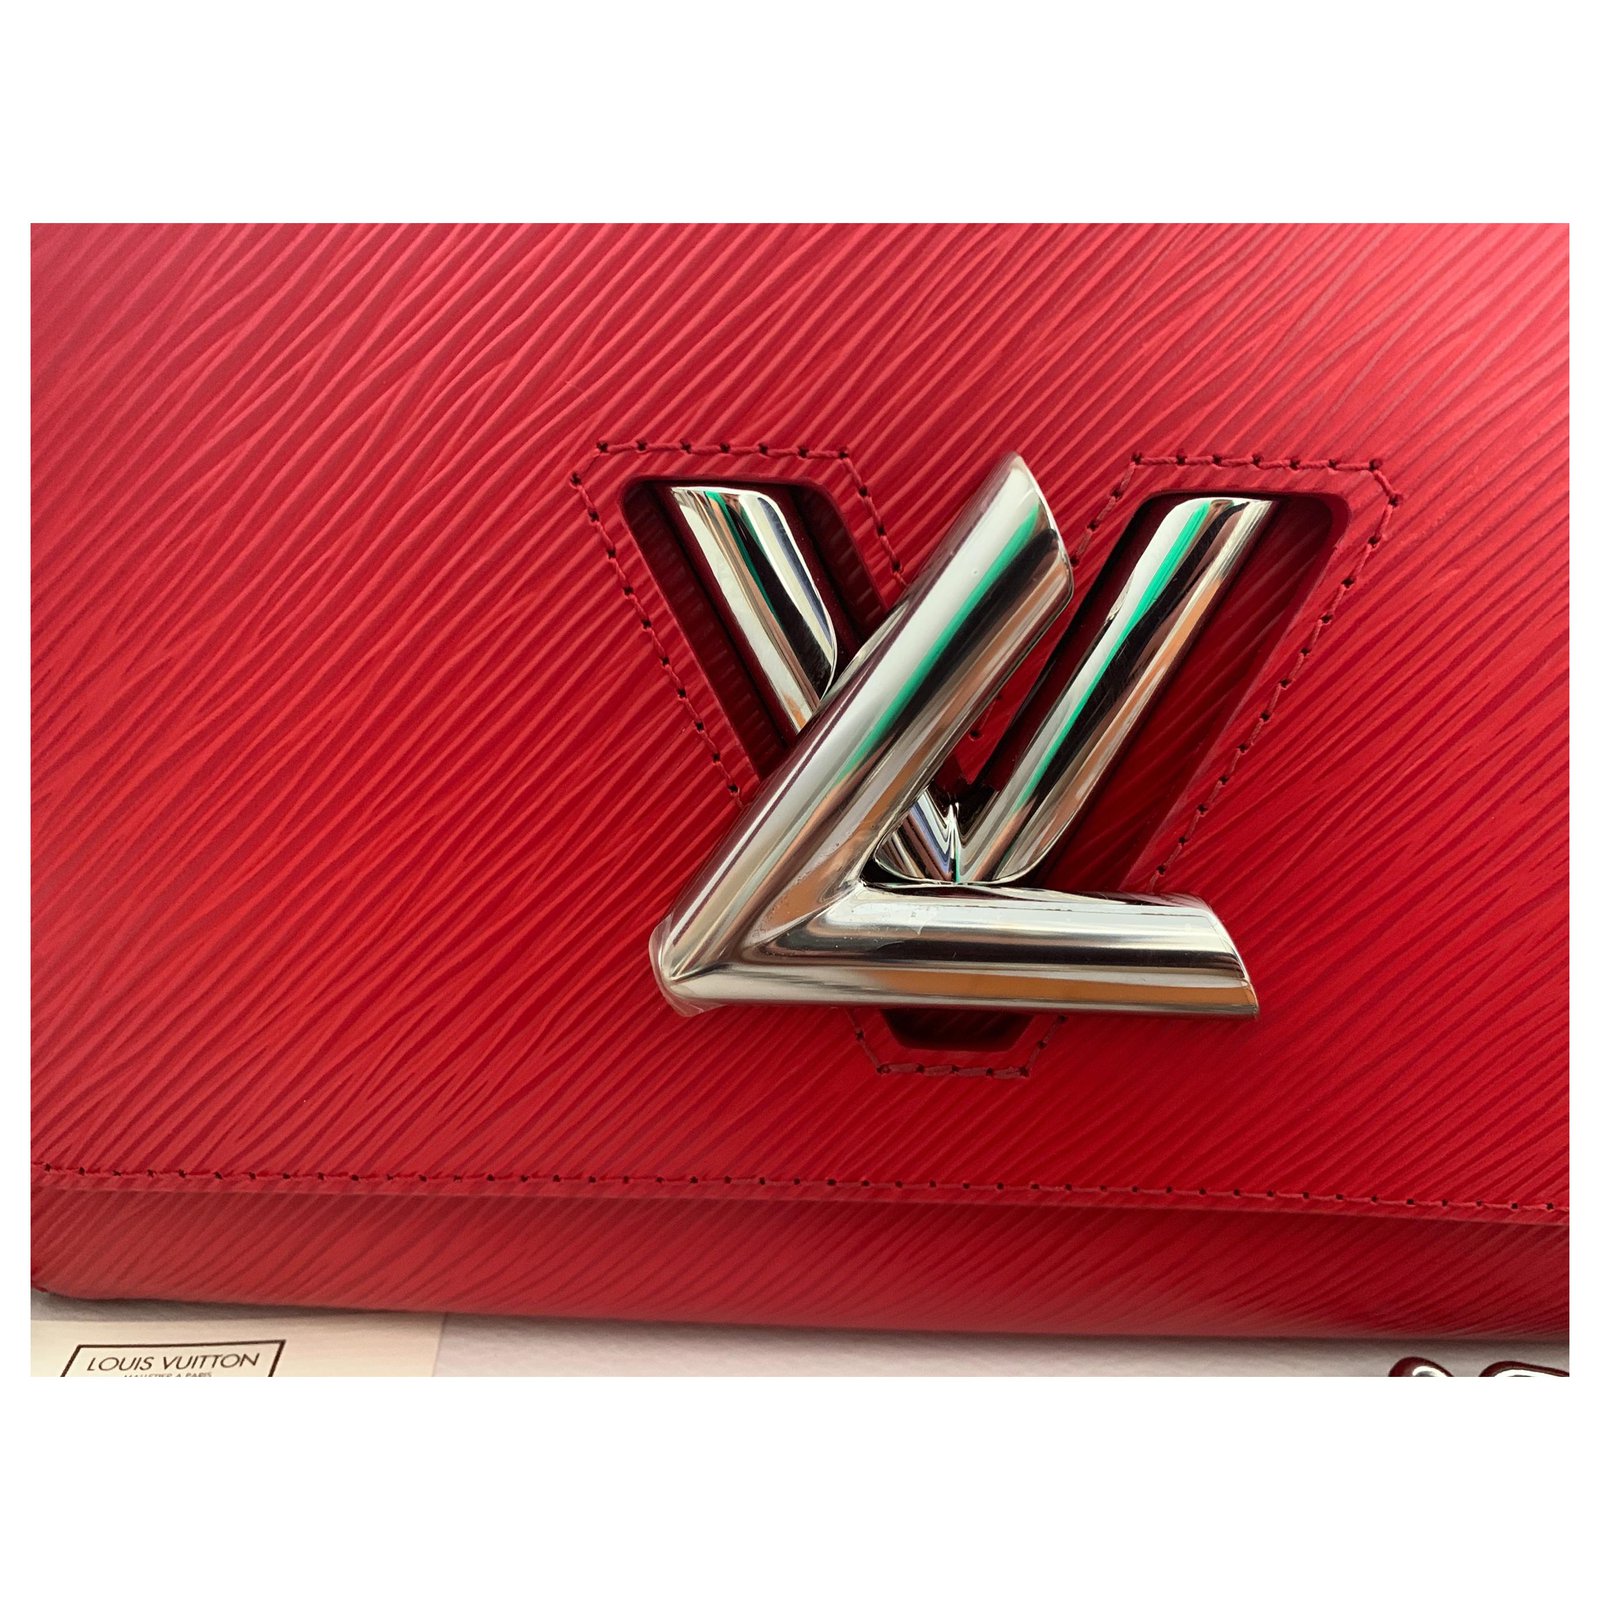 Louis Vuitton MM Leather Twist Bag limited edition Western Limited Edition  White Red ref.121336 - Joli Closet